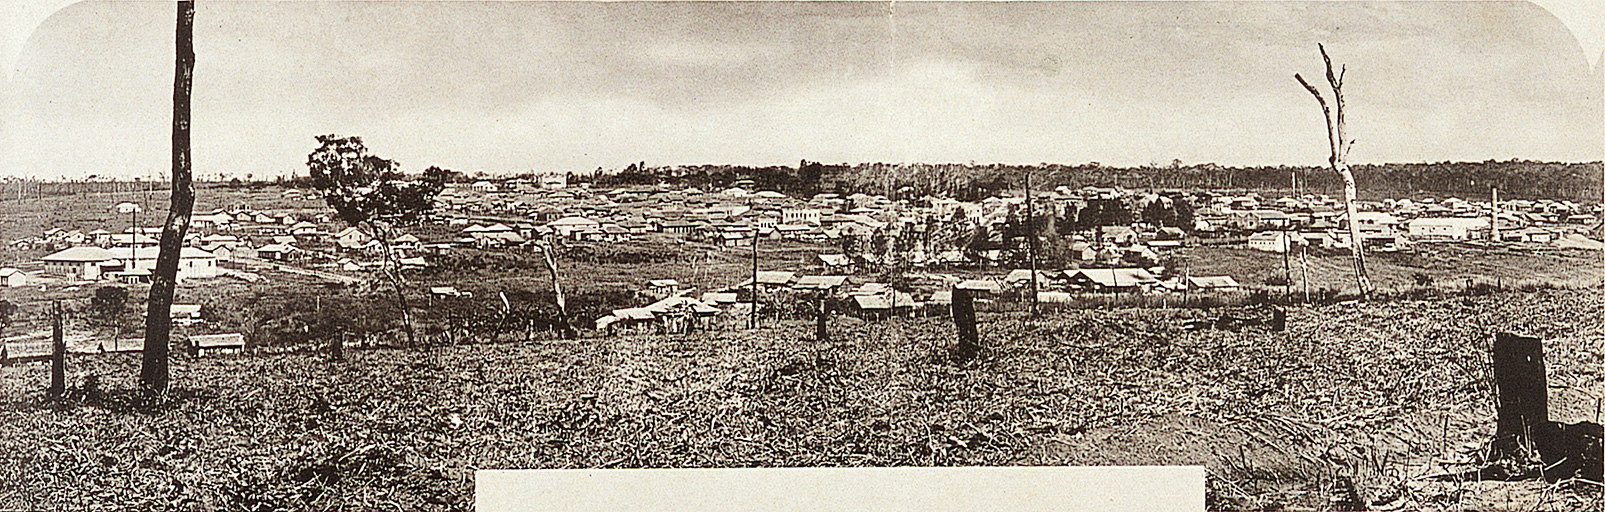 Image “Whole view of Bastos City (October 1937)”